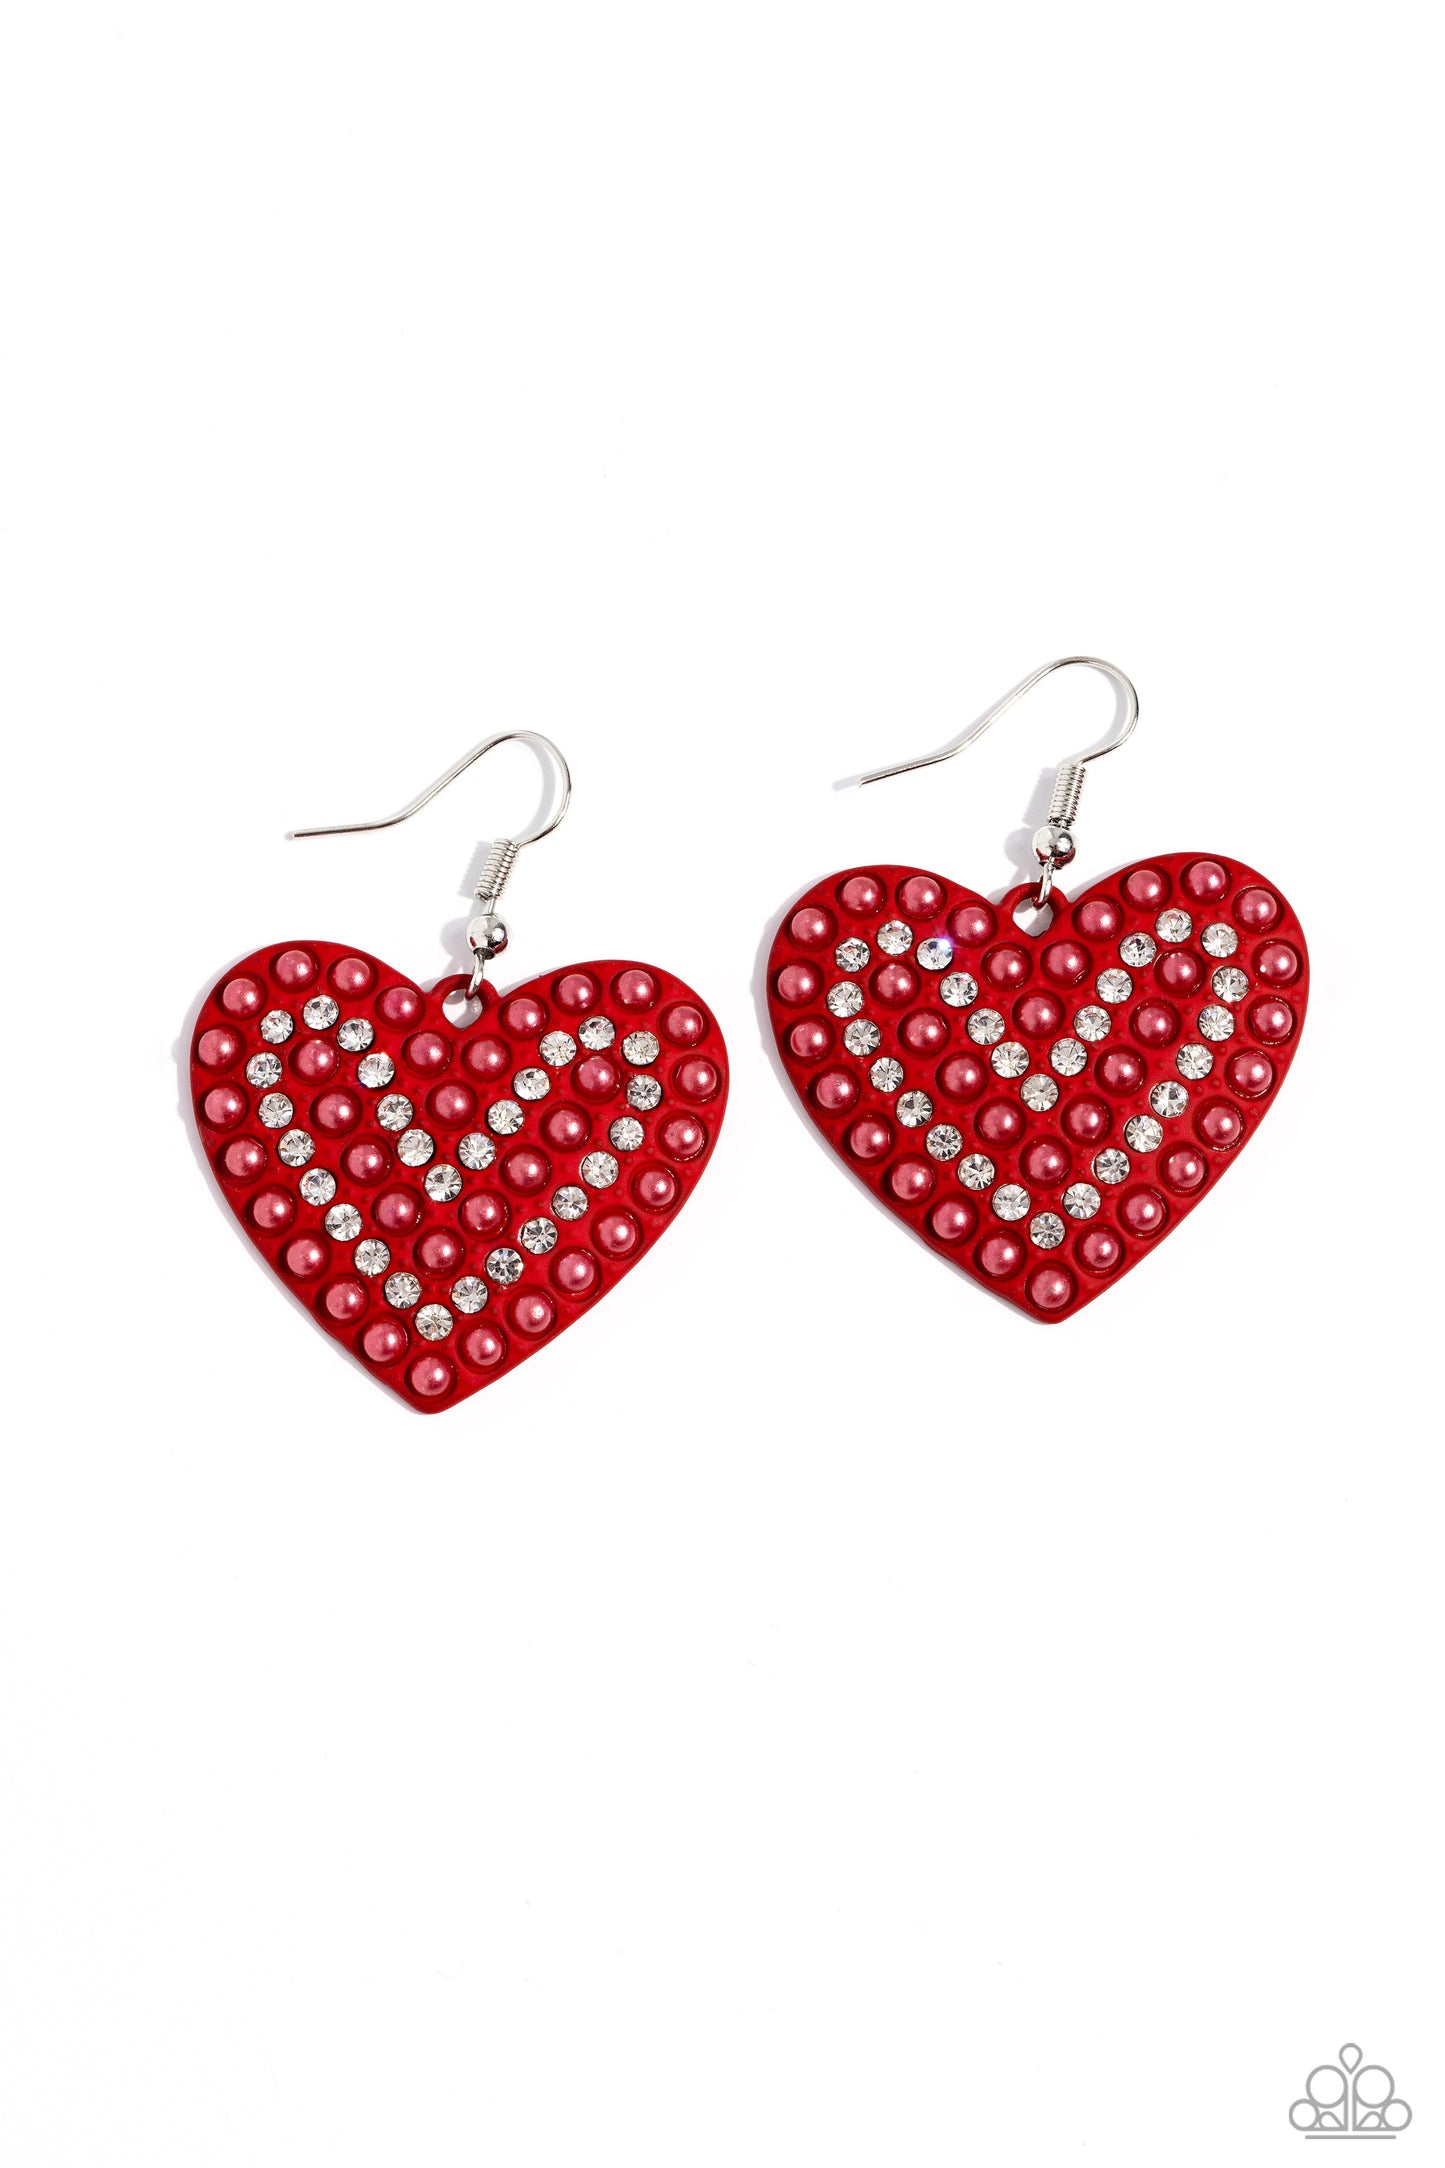 <p>A red-painted heart is covered in rows of tiny white rhinestones and red pearls, emitting radiant shimmer as it swings from the ear. Earring attaches to a standard fishhook fitting.</p> <p><i> Sold as one pair of earrings.</i></p>